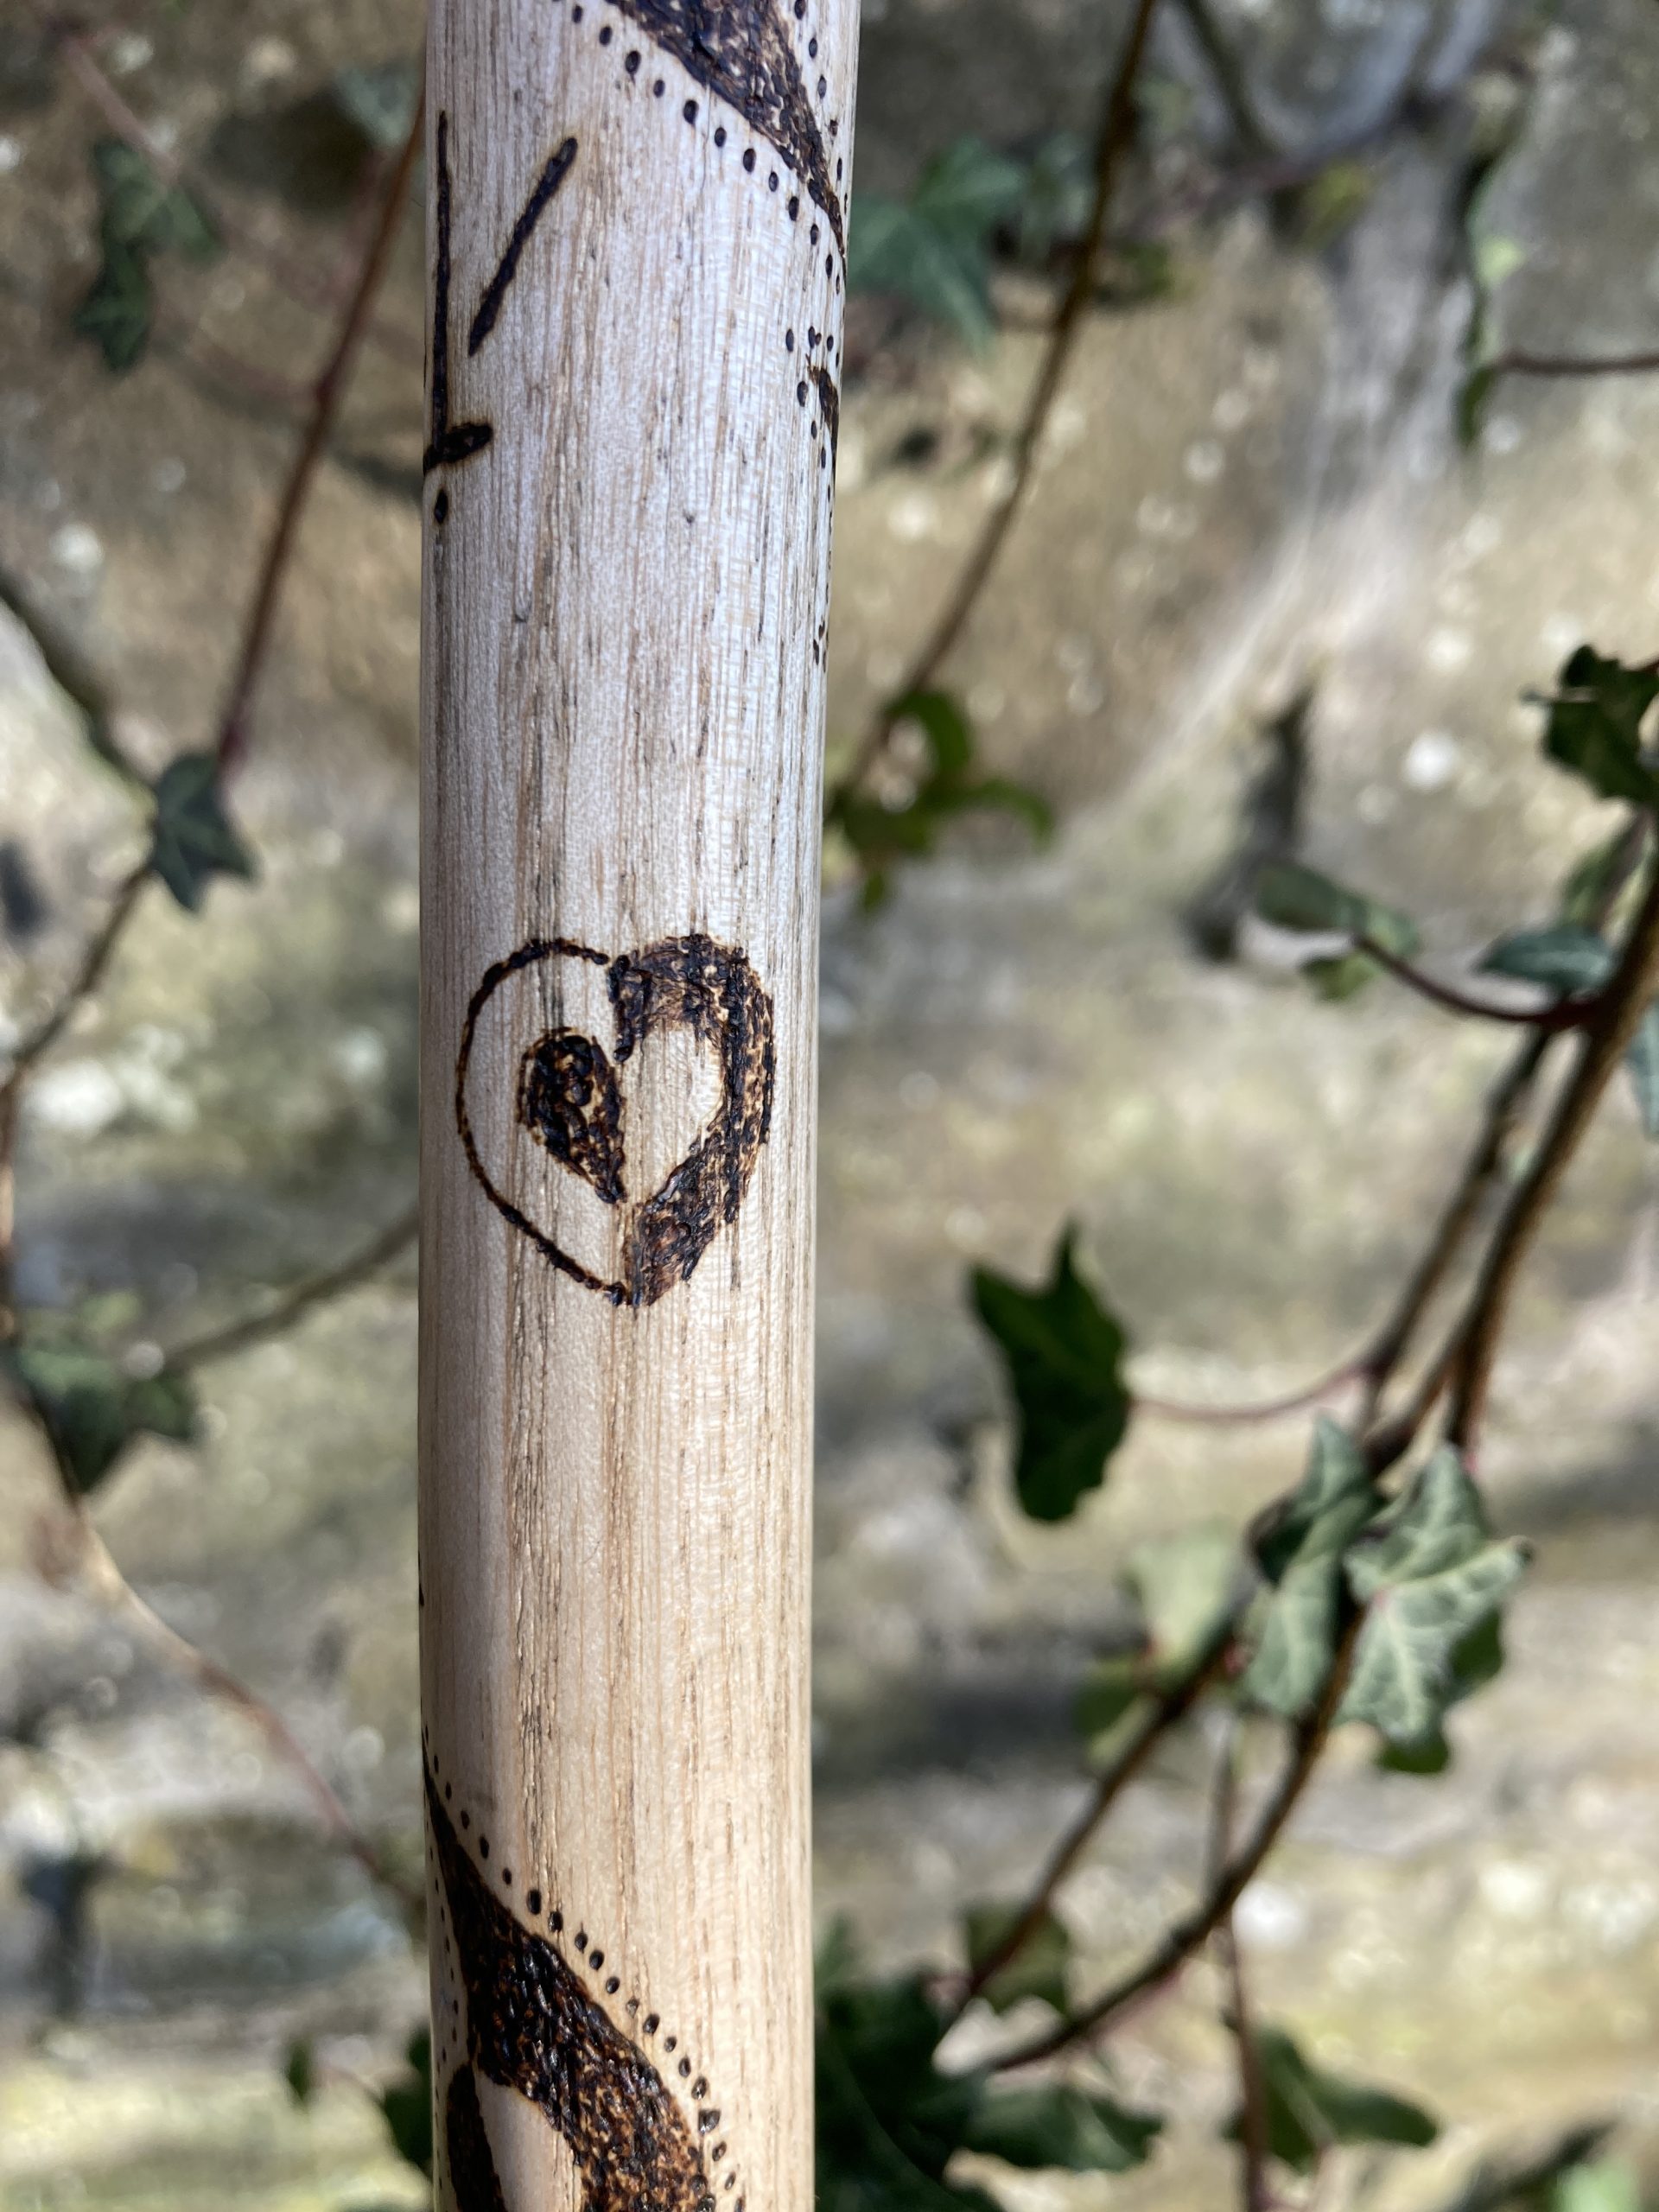 An image of a heart pyrographed onto the wooden staff. It plays with negative inversion, with a dark outline, wood-toned outer image, and dark centre on the left side of the heart. The right side is the opposite with a dark exterior and pale interior.